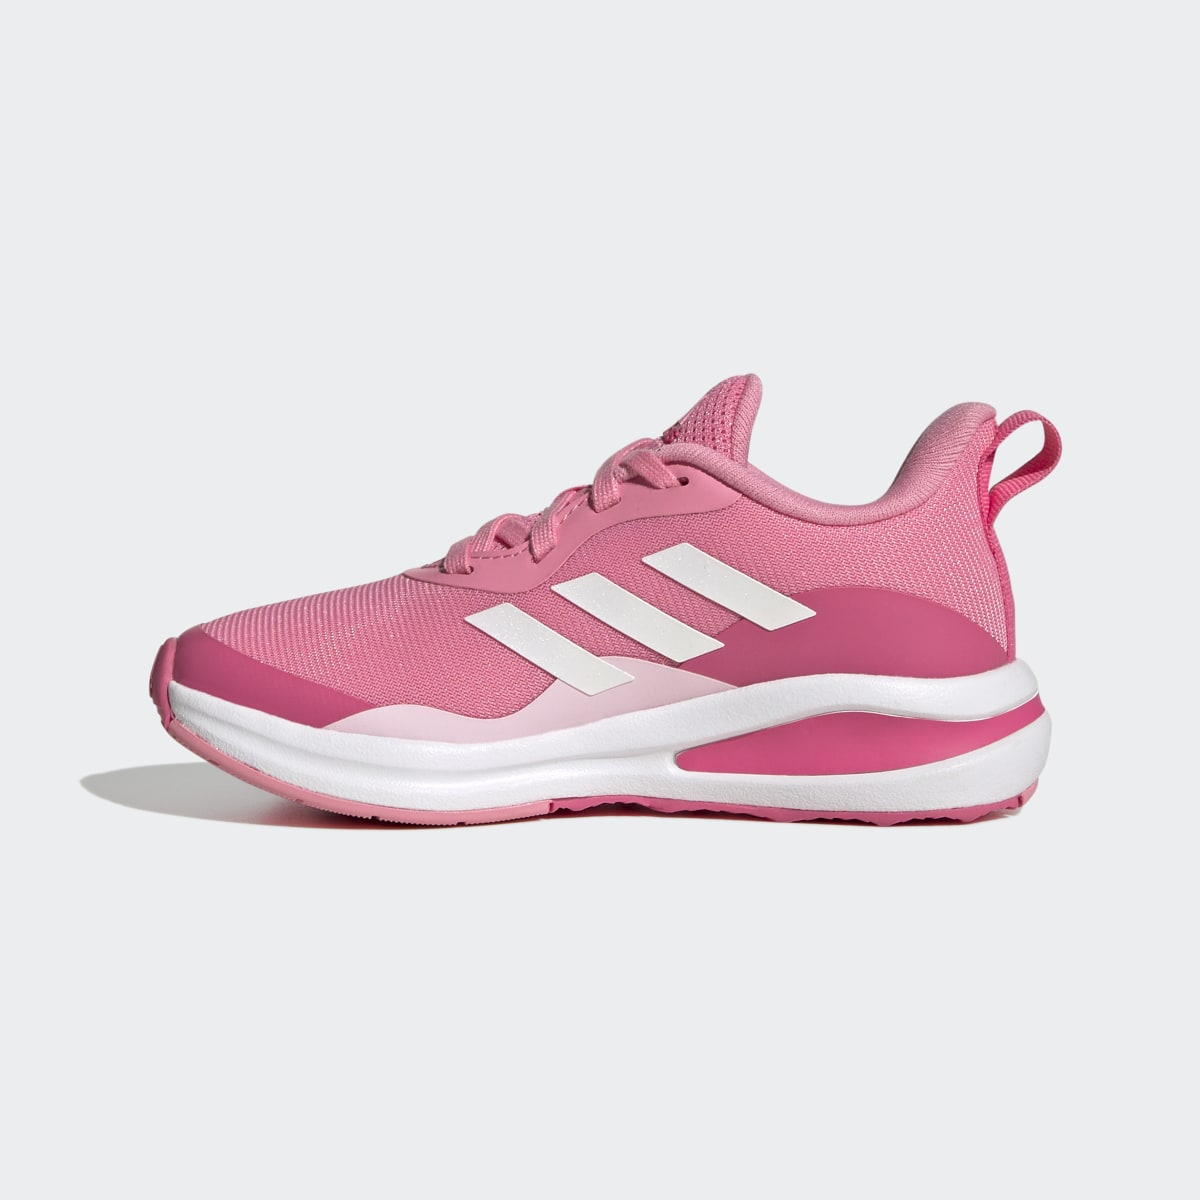 Adidas FortaRun Sport Running Lace Shoes. 7